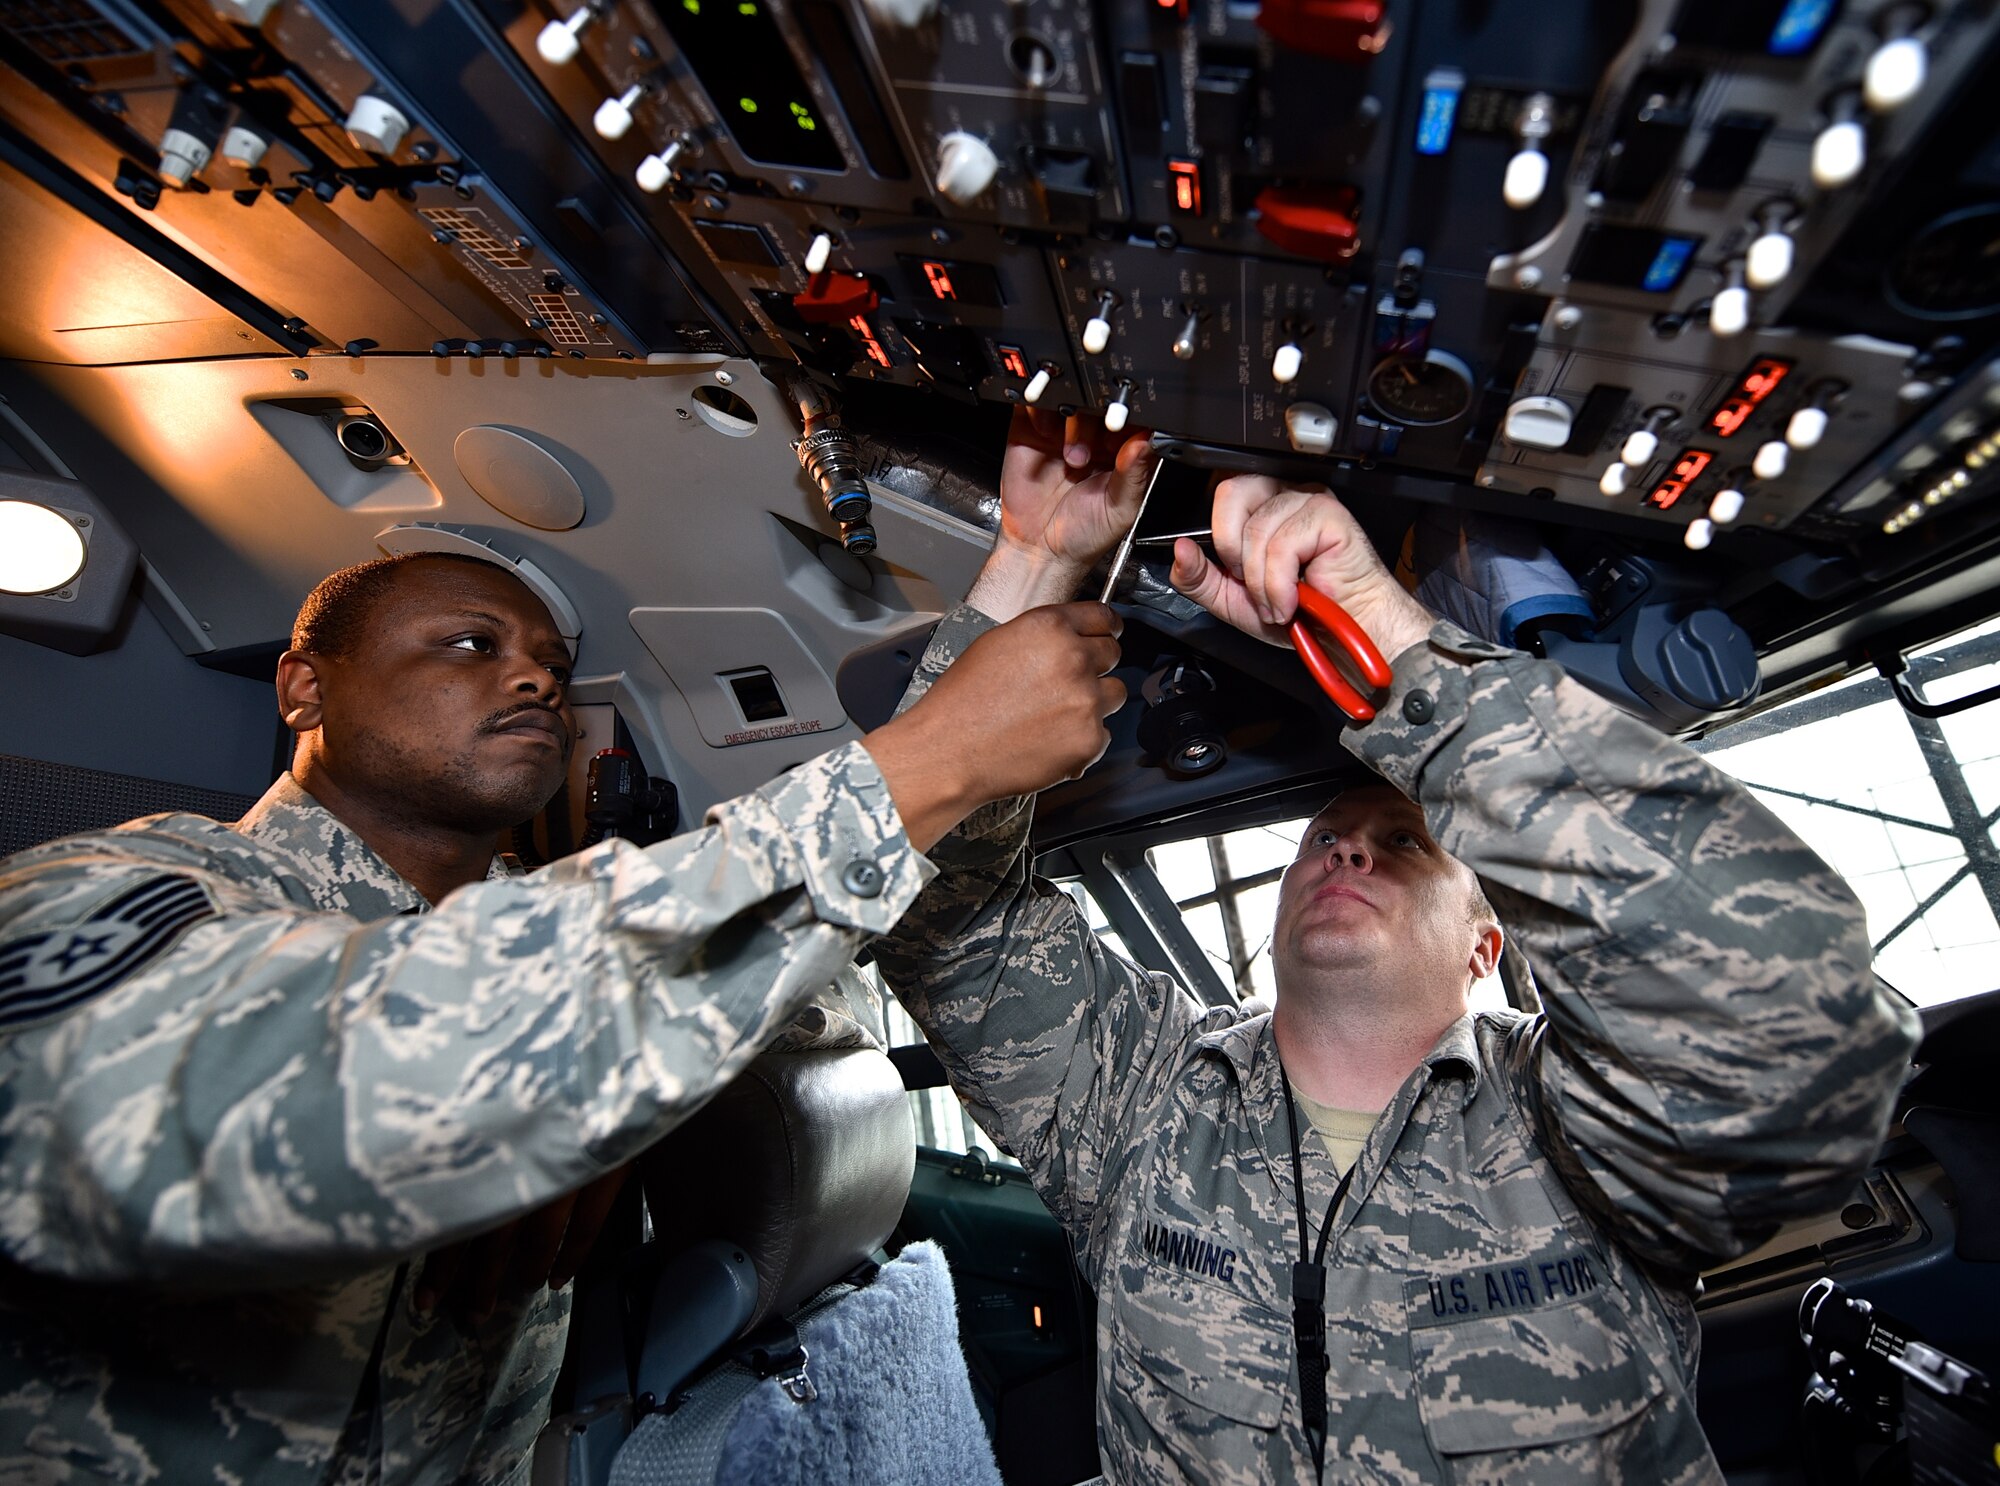 Tech. Sgt. Aaron Flanigan, left, an avionics tech with the 932nd Aircraft Maintenance Squadron assists Tech. Sgt. Billy Manning, sheets metal worker with the 932nd Maintenance Squadron to repair an overheated heads up display and replace a nut plate, May 2, 2016, Scott Air Force Base, Illinois.  (U.S. Air Force photo by Christopher Parr)